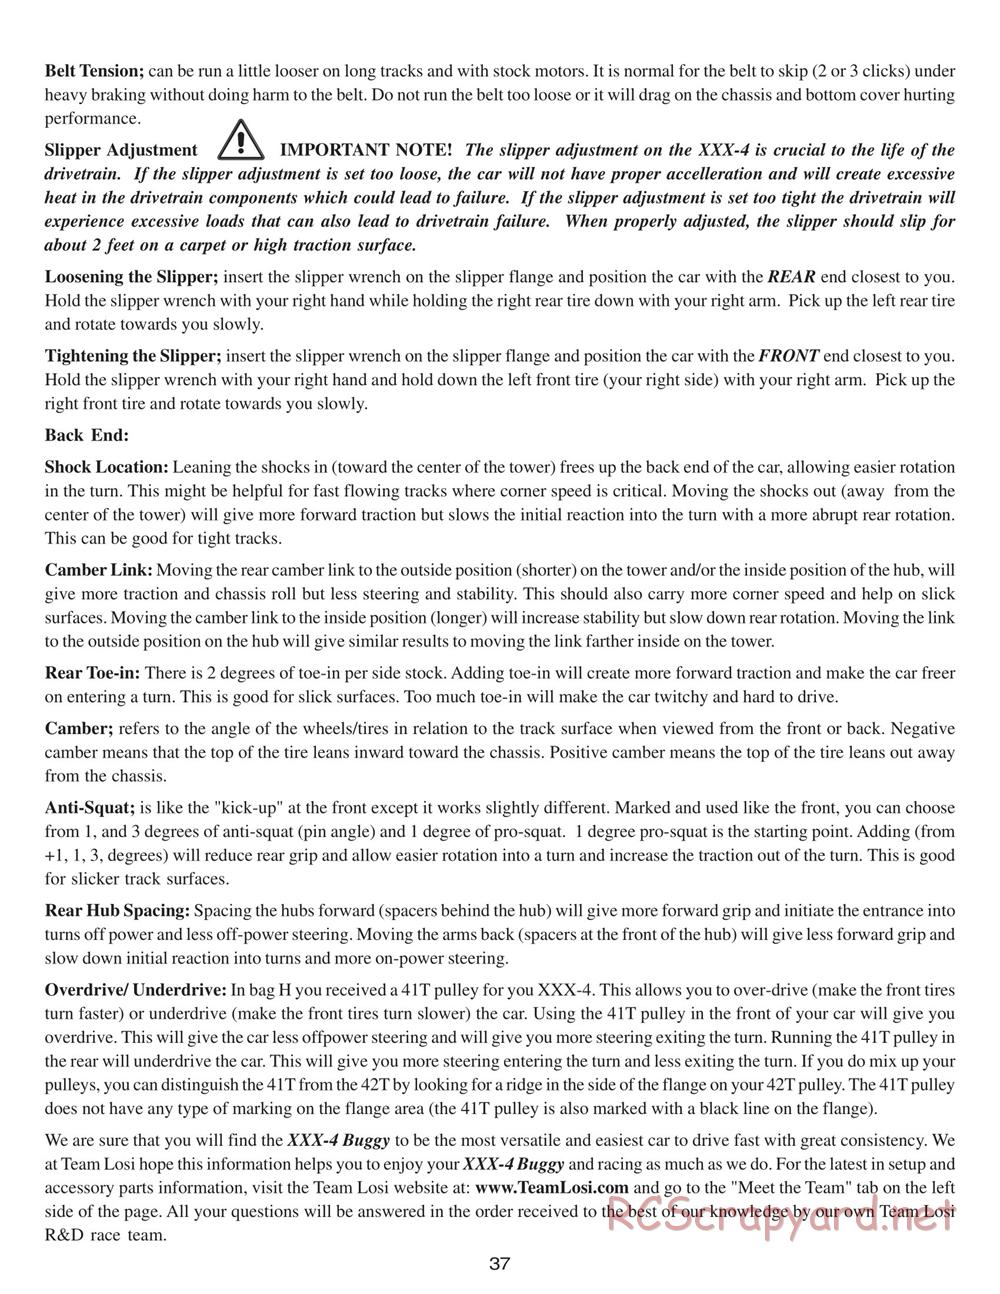 Team Losi - XXX4 - Manual - Page 40